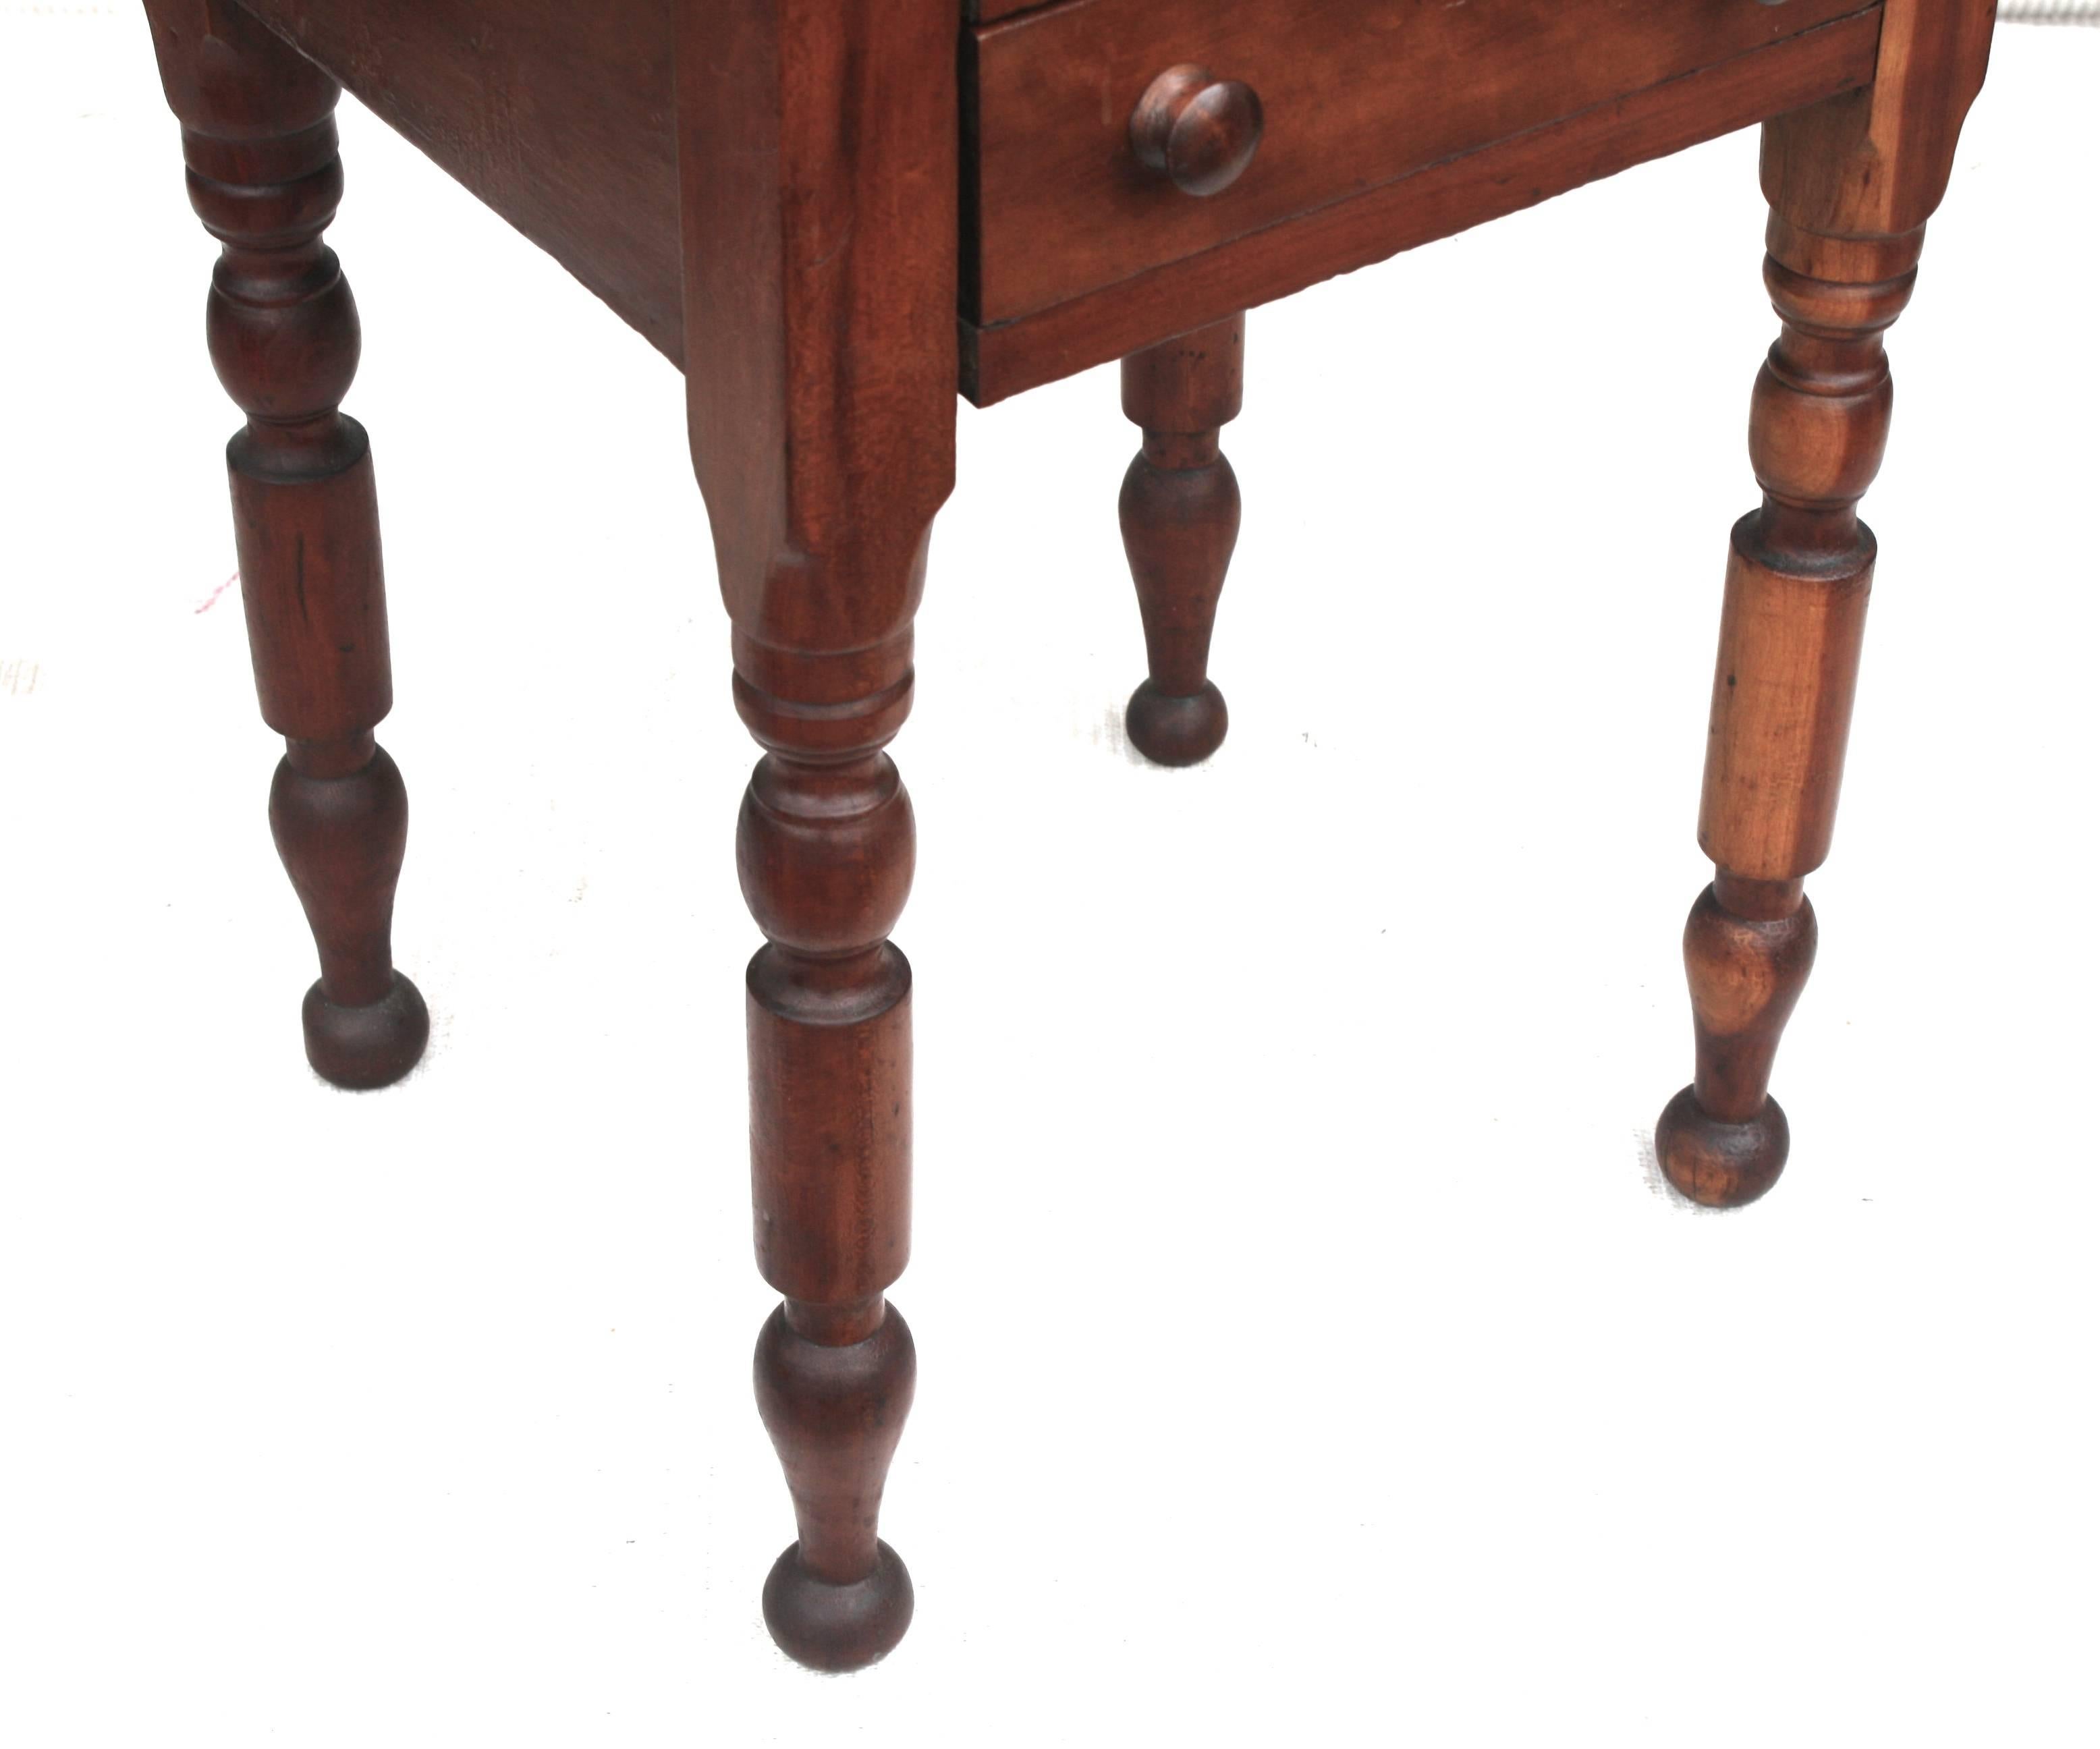 Mid-19th Century American Classical Baluster Legged Cherrywood Side Table For Sale